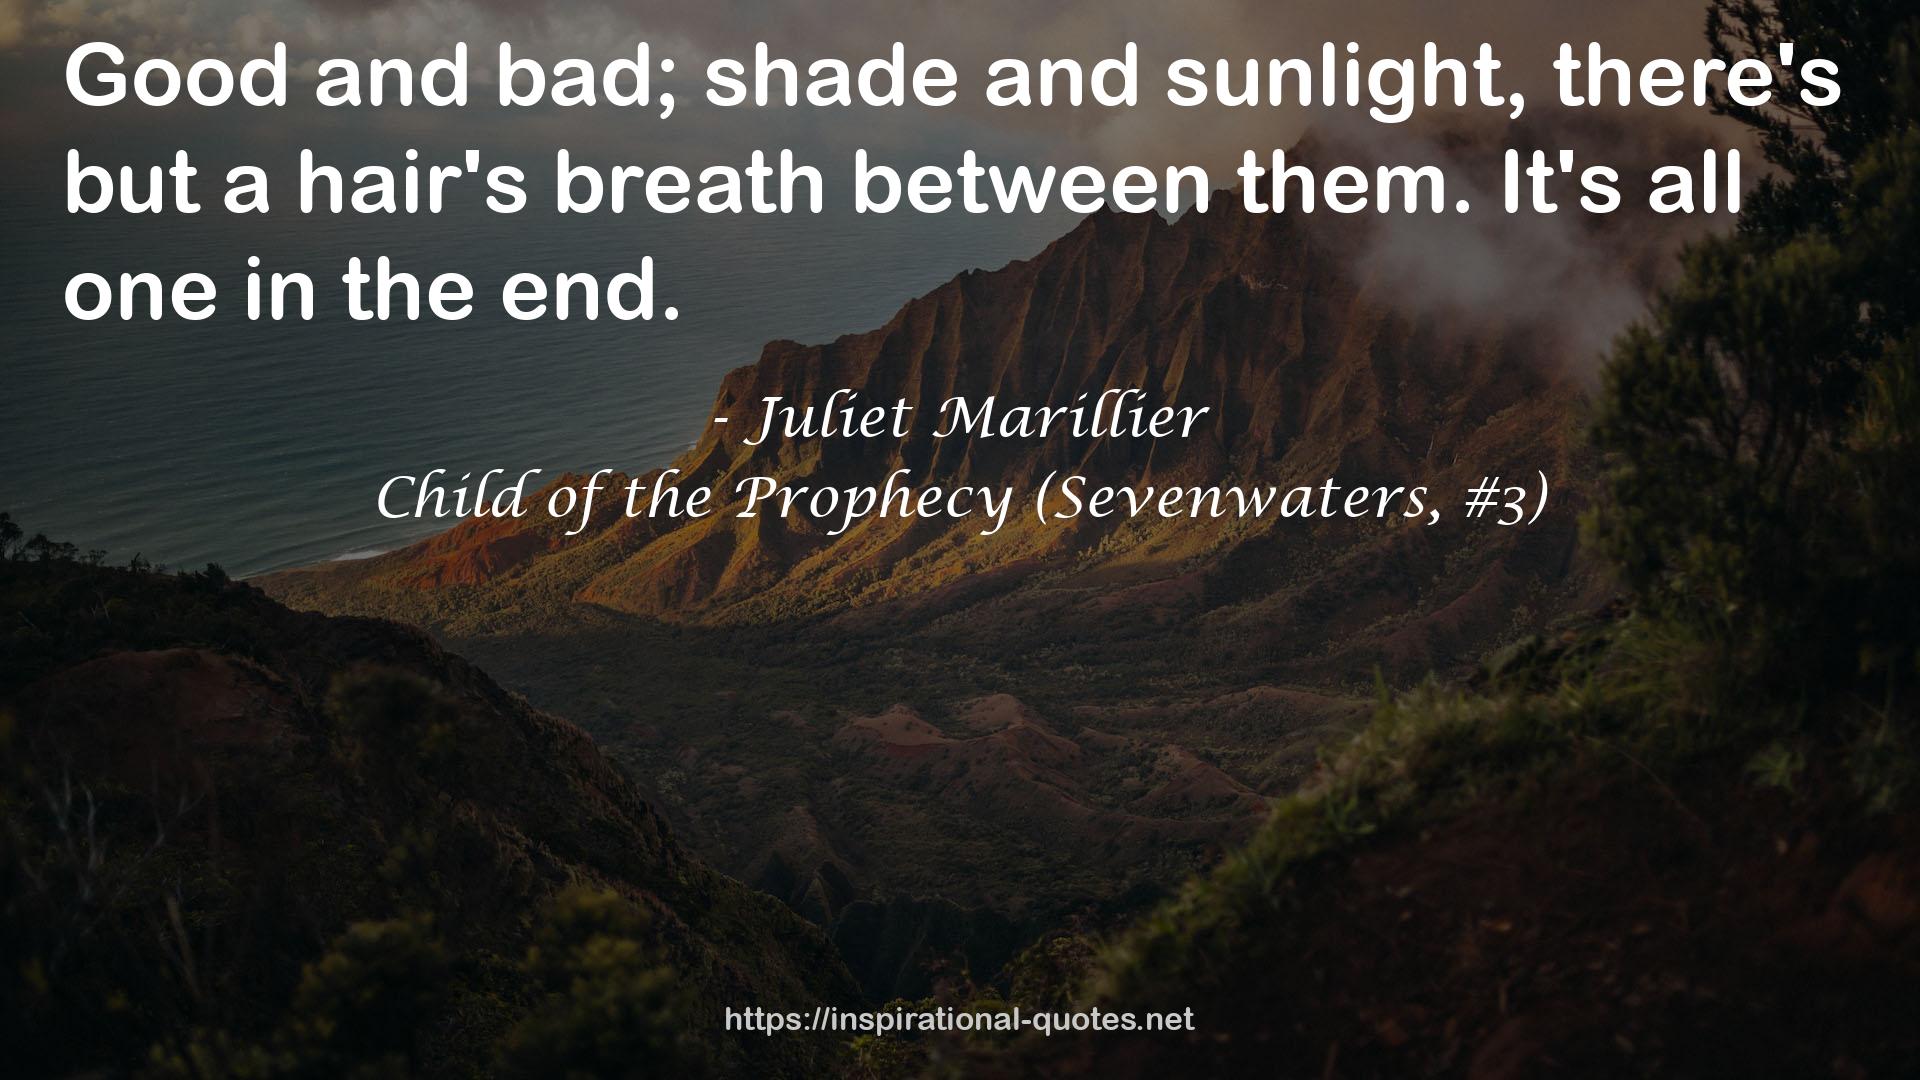 Child of the Prophecy (Sevenwaters, #3) QUOTES